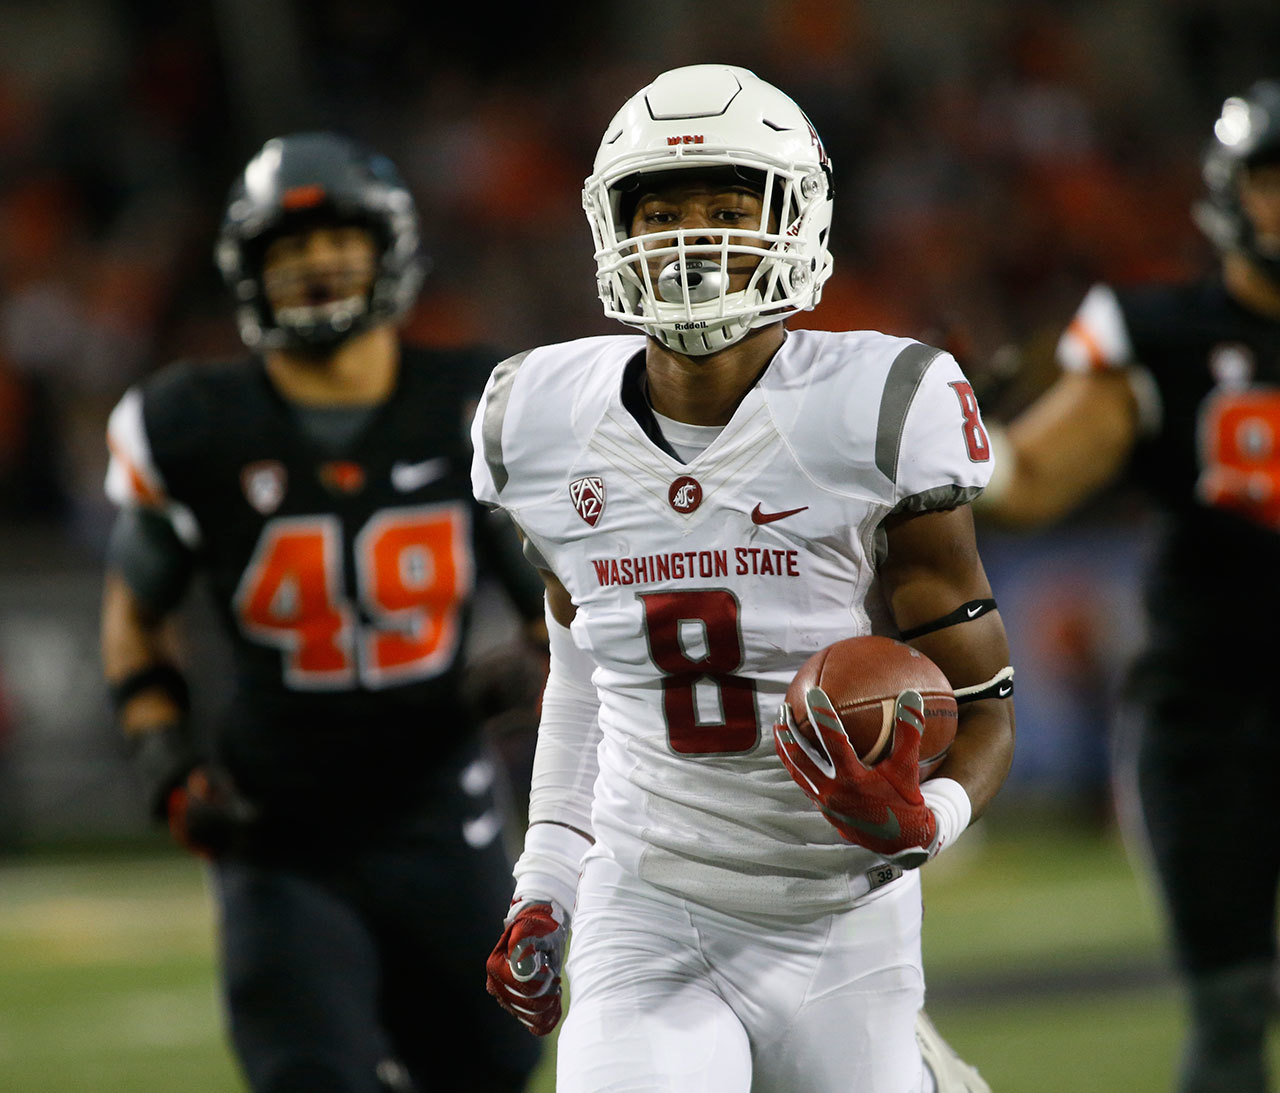 Washington State receiver Tavares Martin Jr. (8) has been dismissed from the team for a violation of team rules. (AP Photo/Timothy J. Gonzalez)